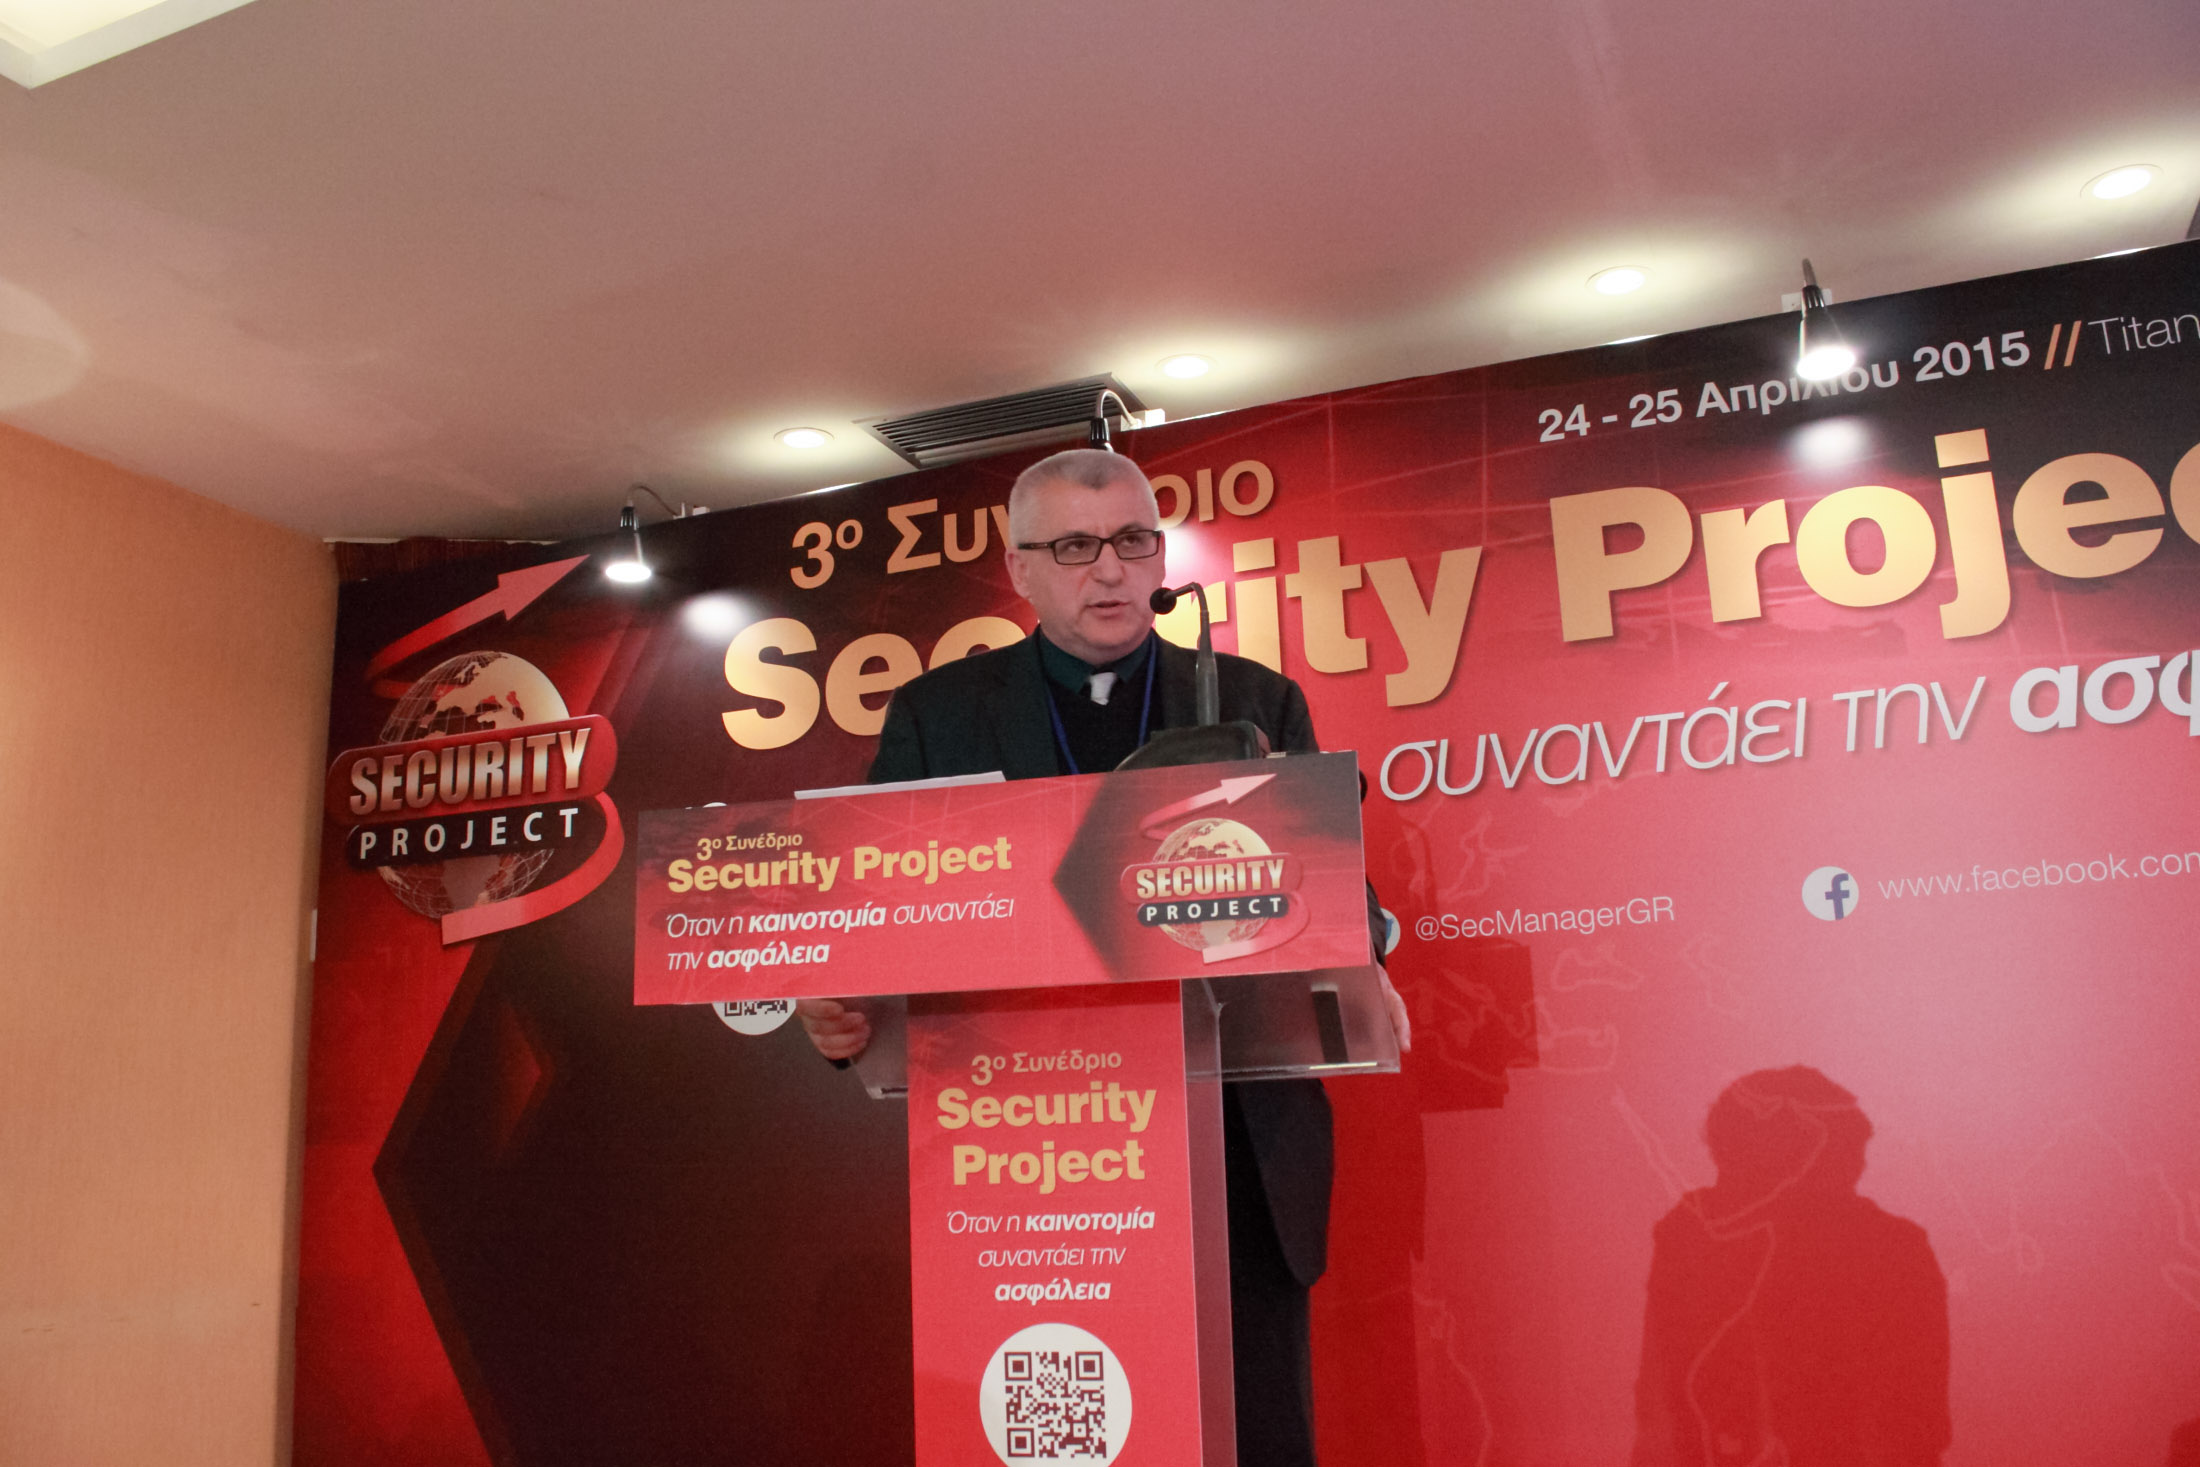 Securityprojecty15